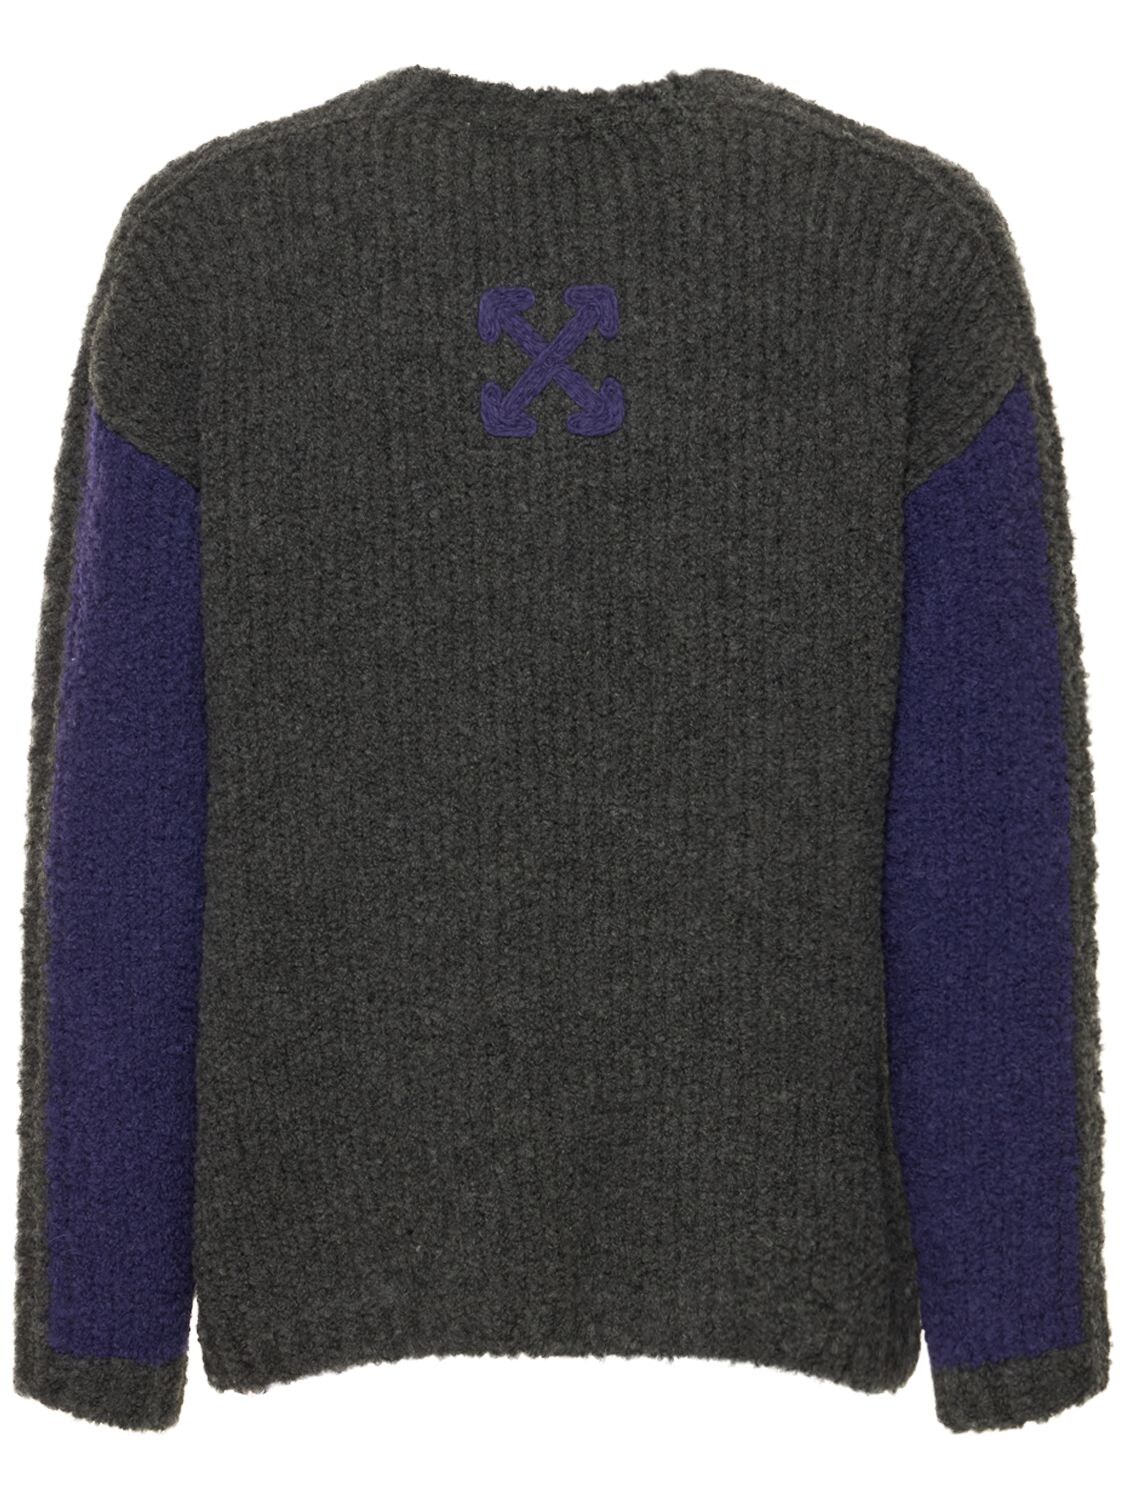 OFF-WHITE Wool Blend Knit Sweater